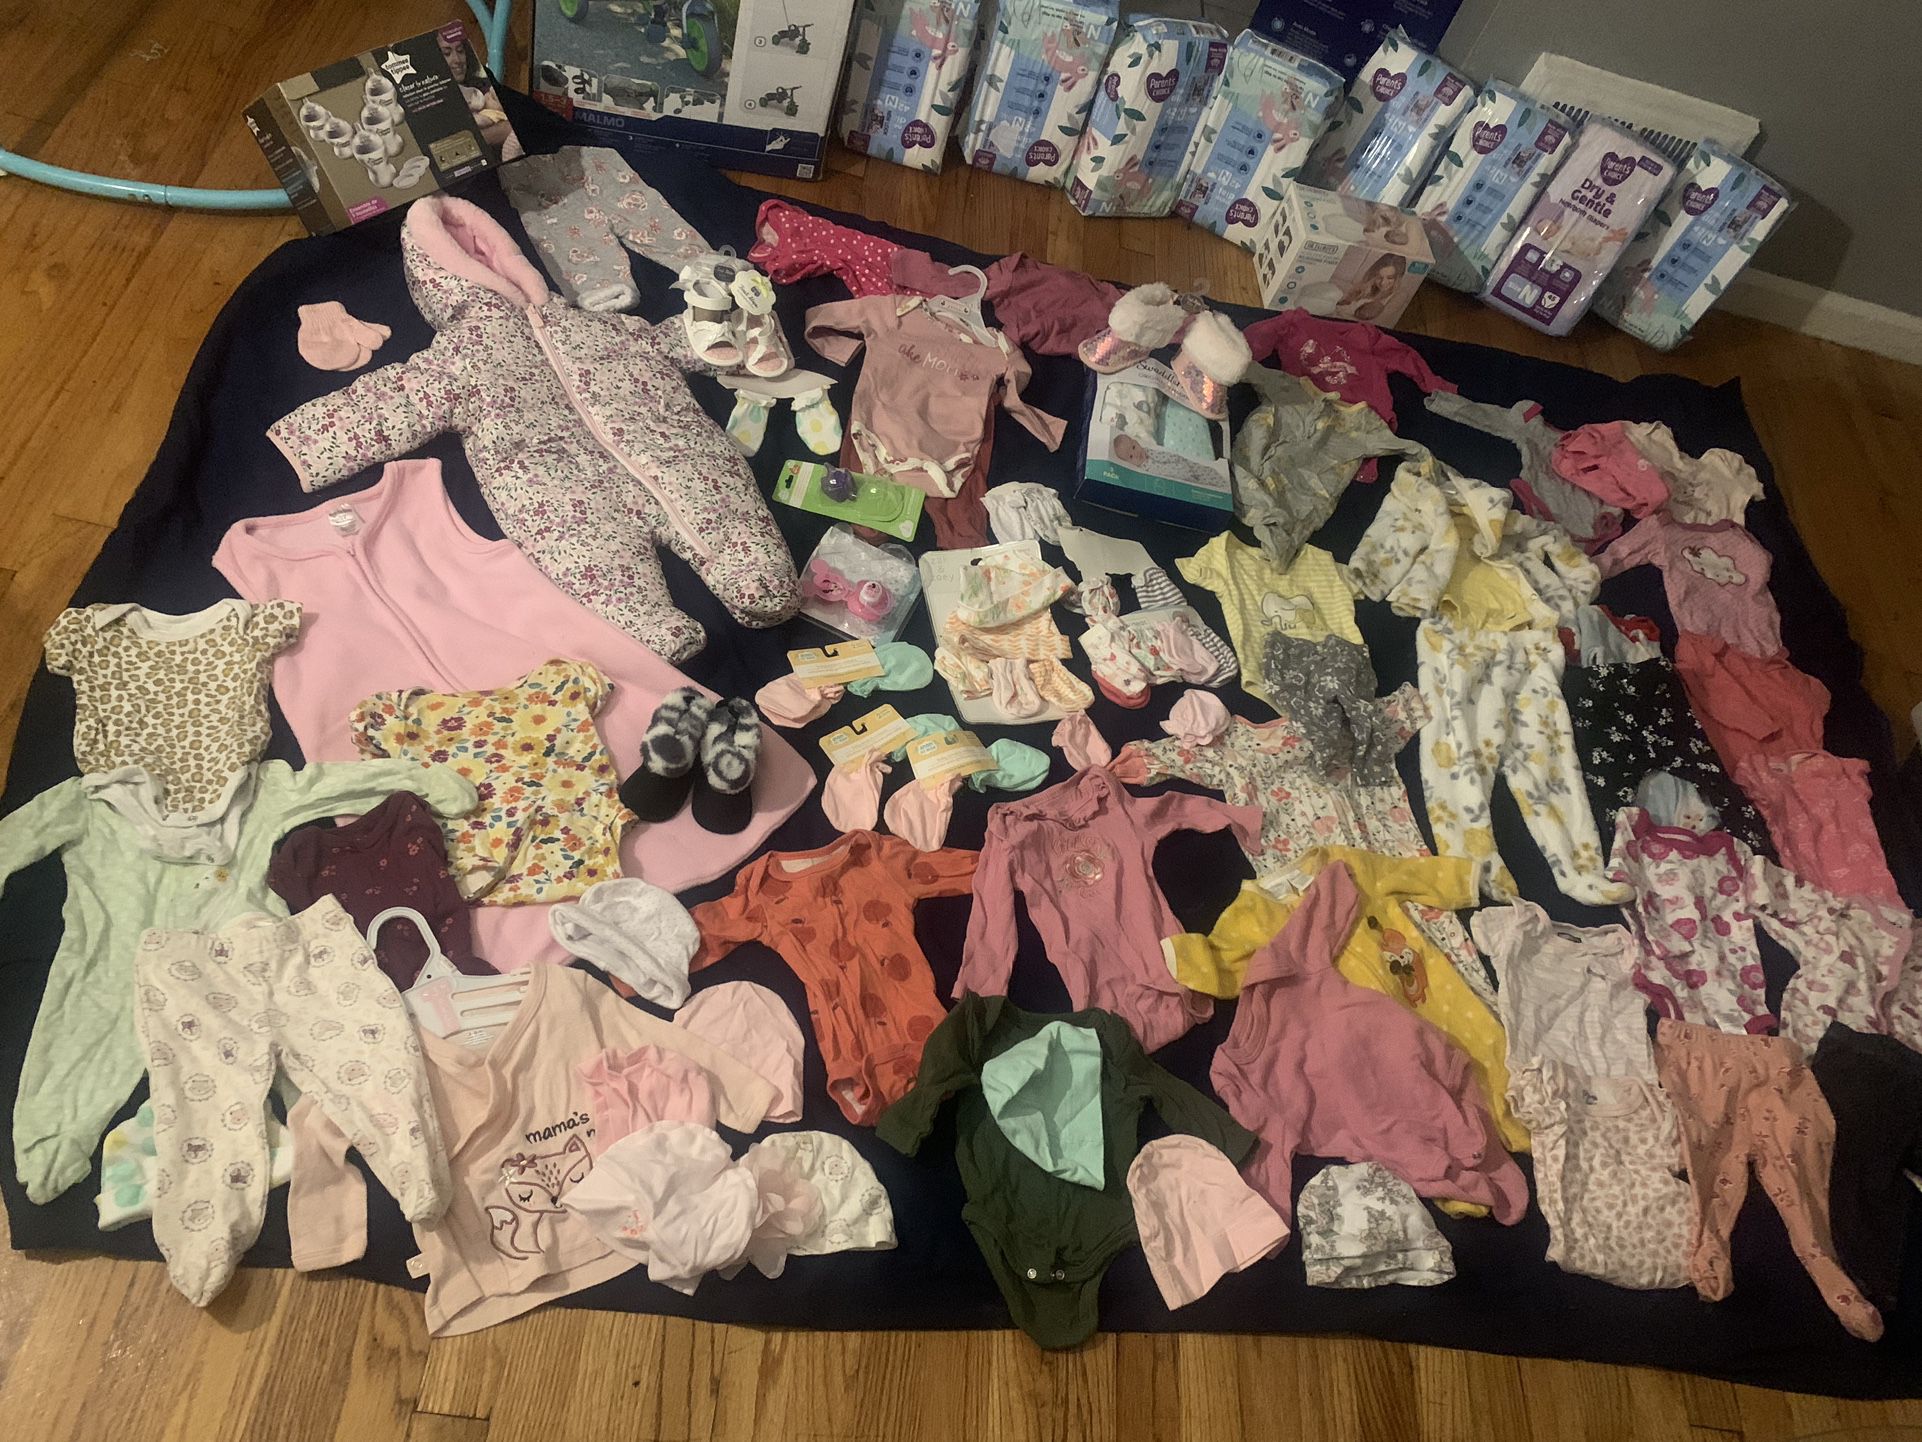 Baby Cloths With Diapers